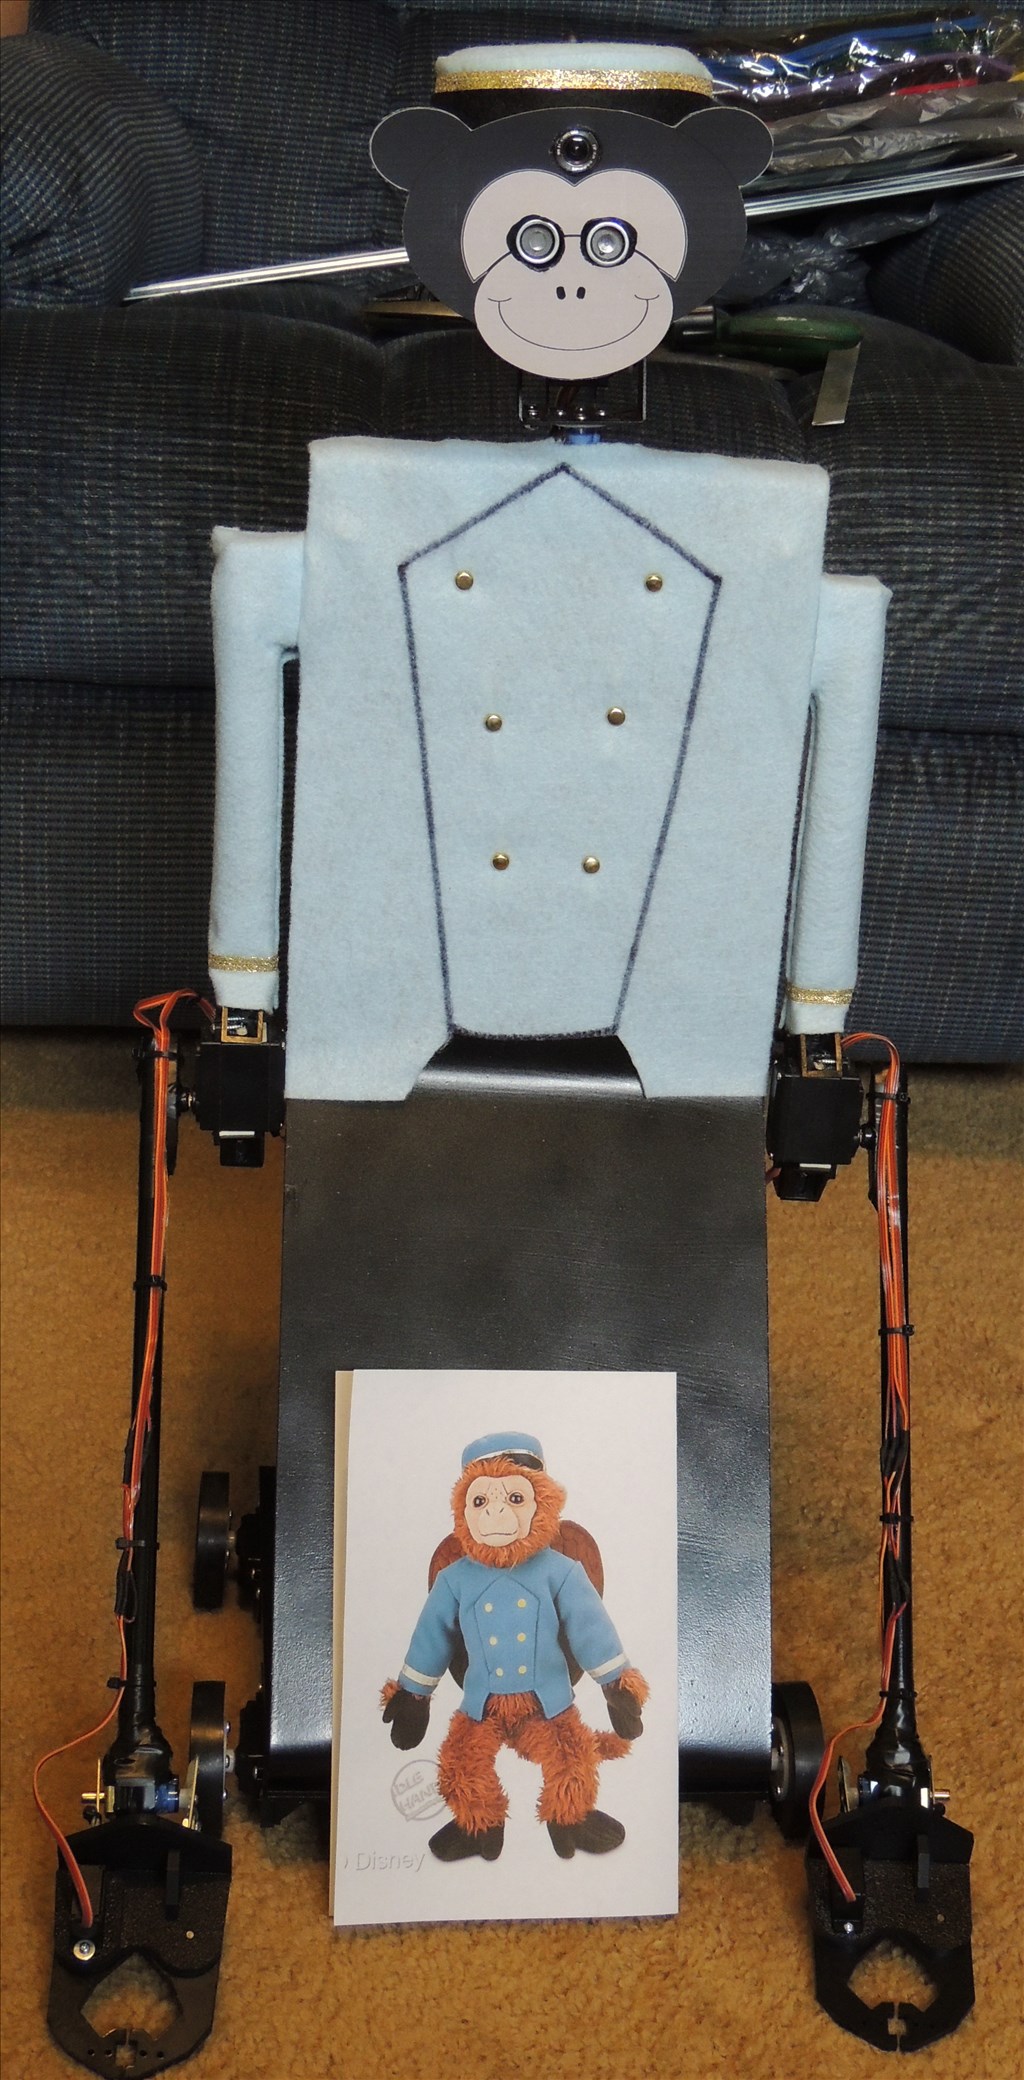 Justinratliff's Finley Themed Robot